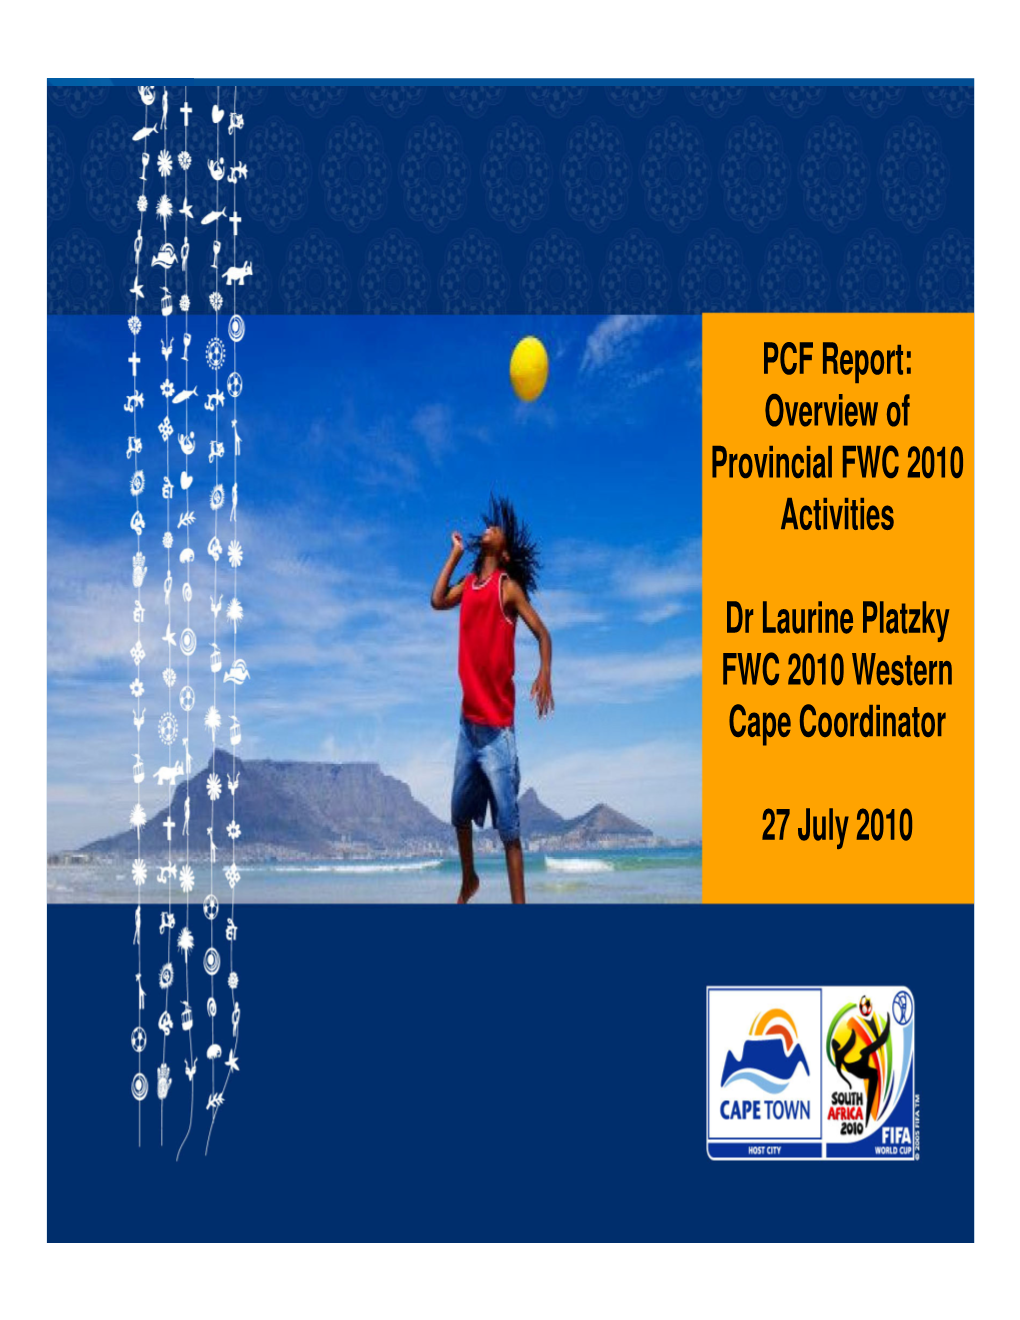 PCF Report: Overview of Provincial FWC 2010 Activities Dr Laurine